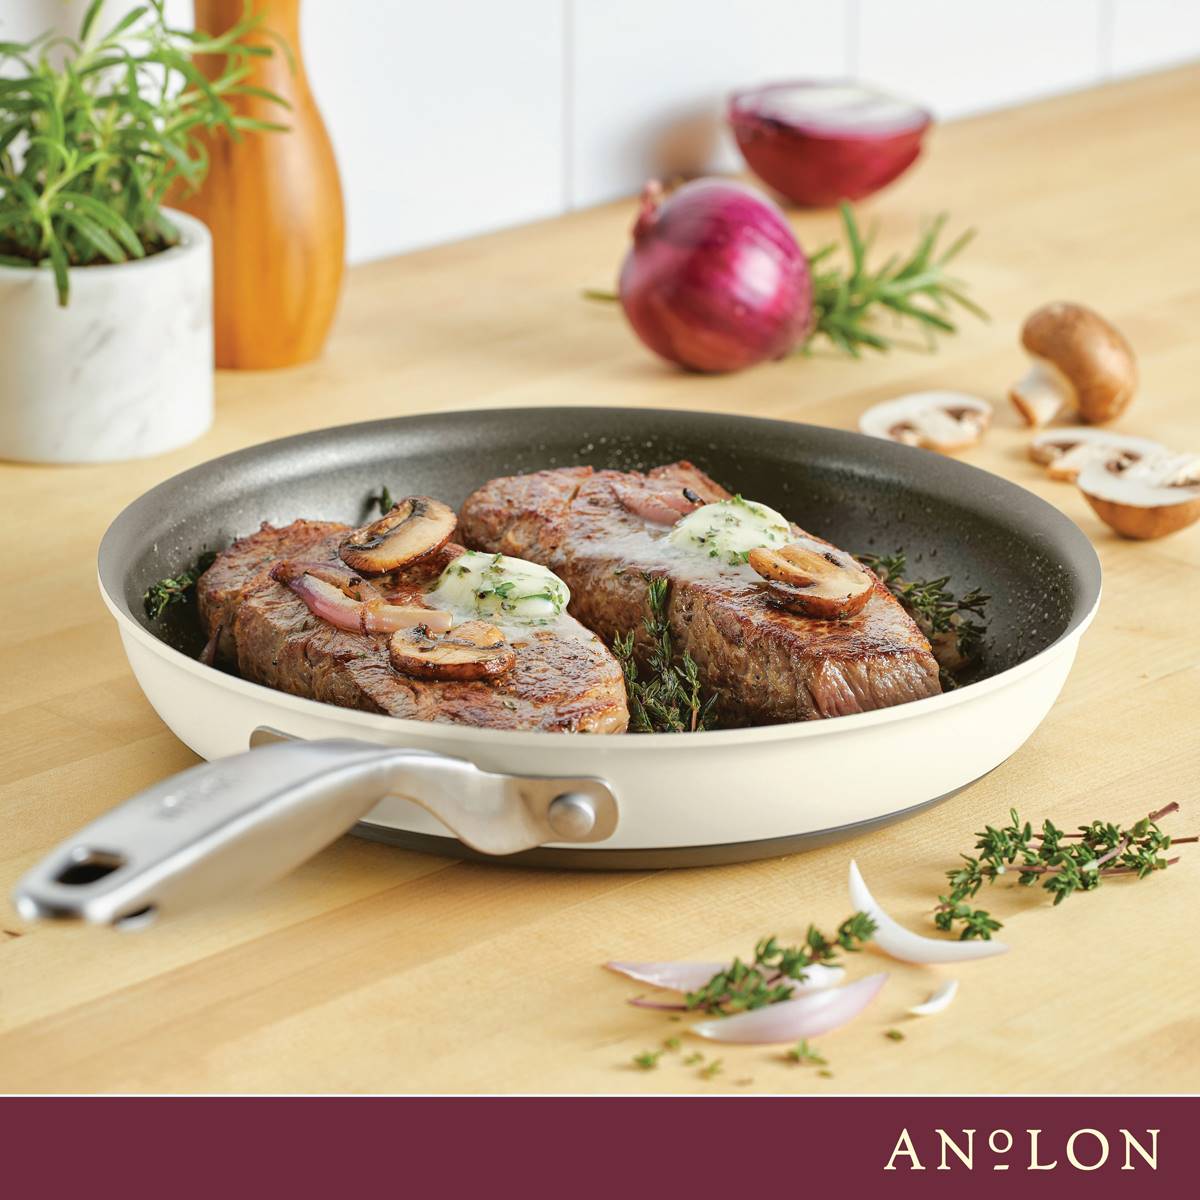 Anolon(R) Achieve Hard Anodized Nonstick 10in. Frying Pan